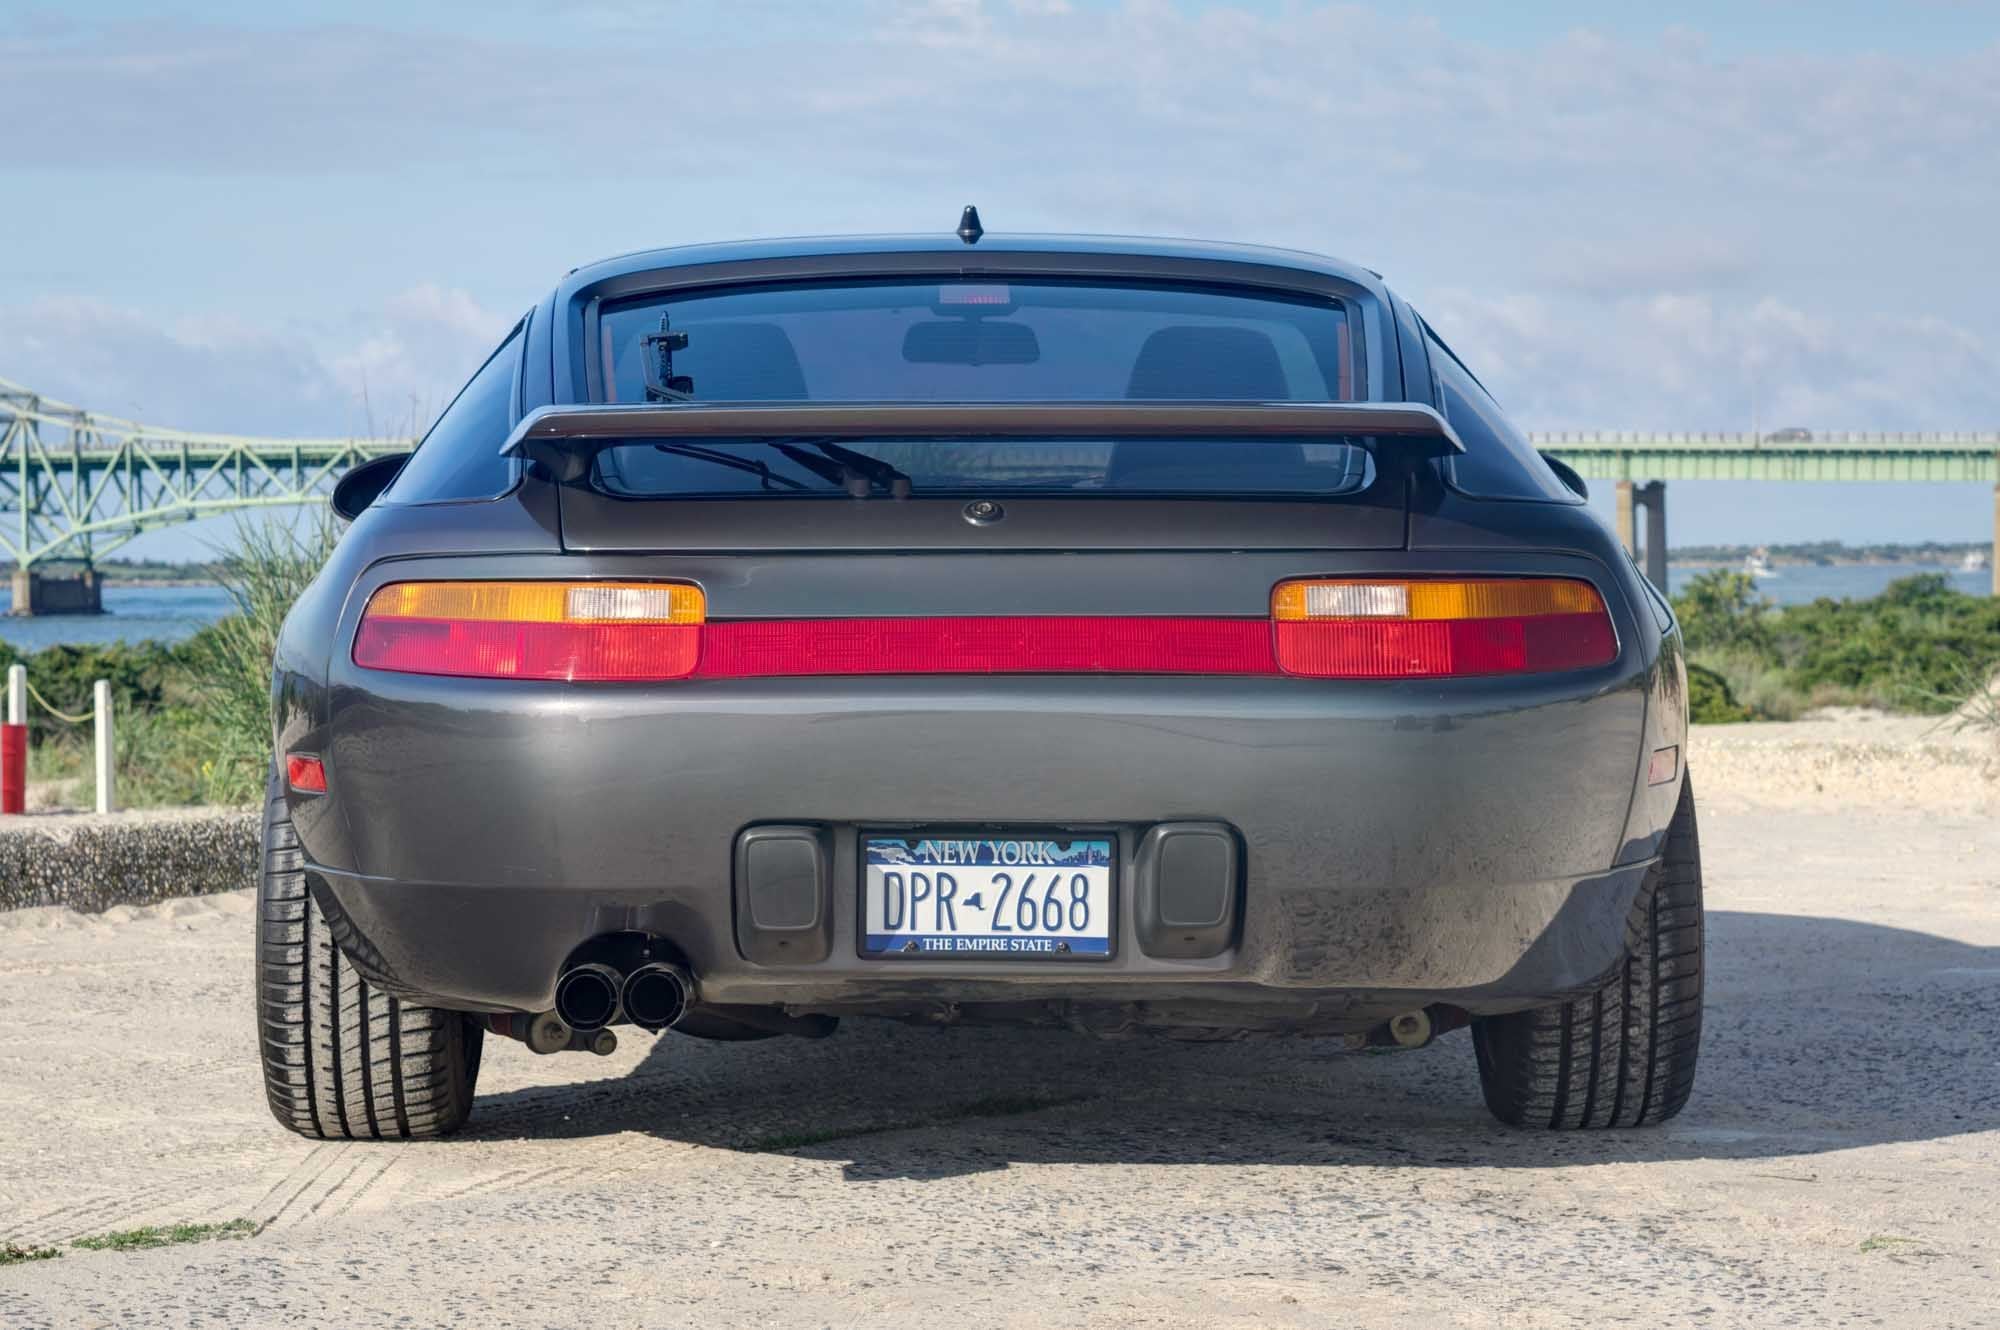 1993 Porsche 928 - 1993, 928, GTS - Used - VIN WP0AA2922PS820127 - 85,300 Miles - 8 cyl - 2WD - Automatic - Hatchback - Gray - Sound Beach, NY 11789, United States